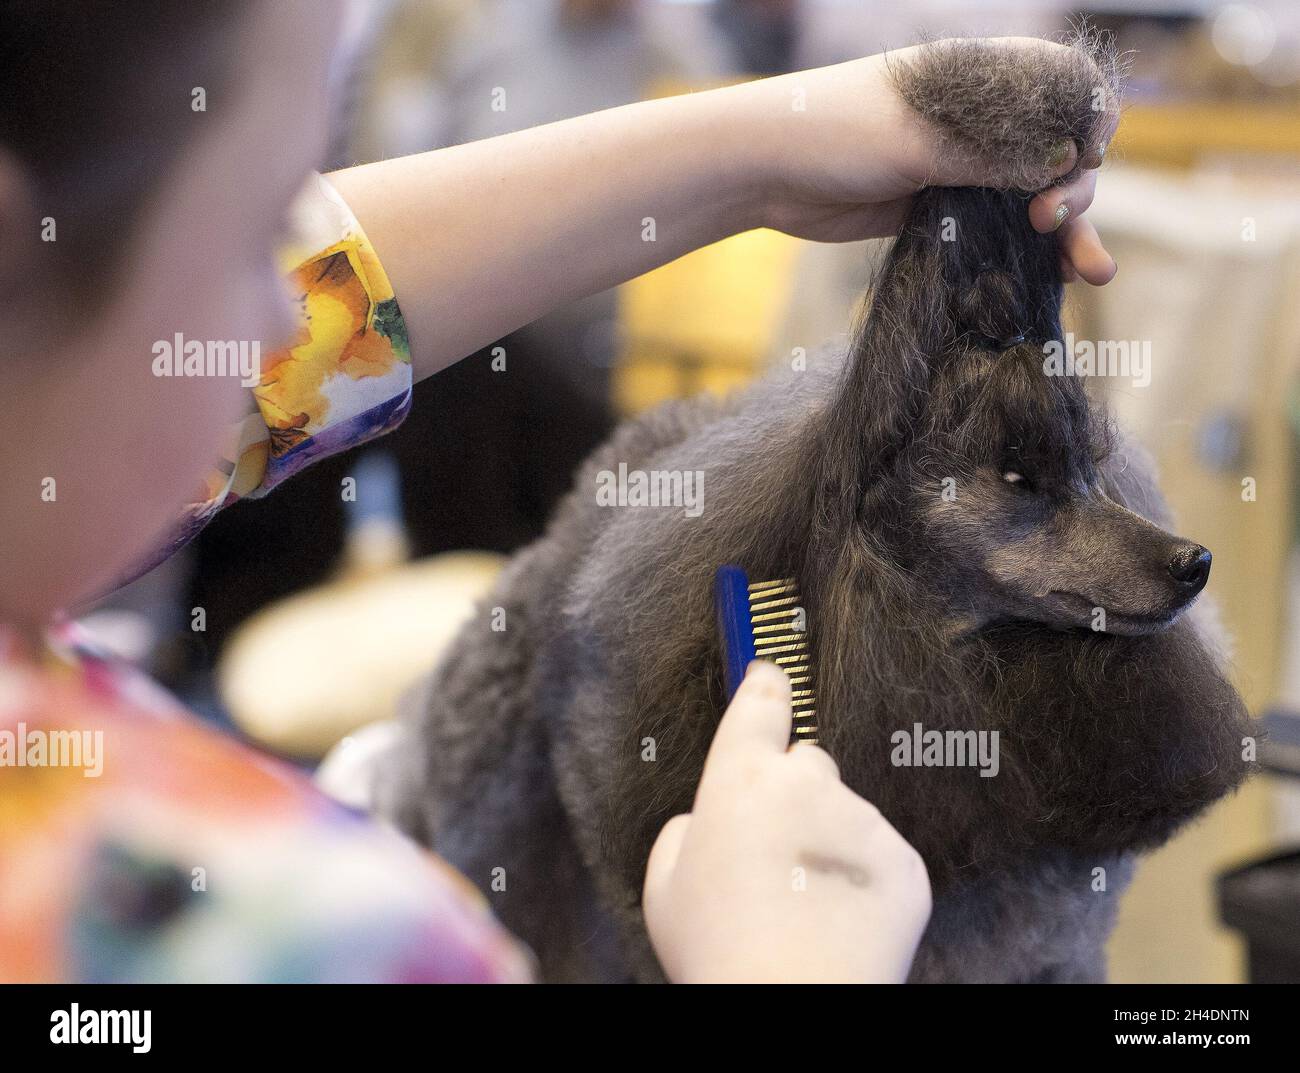 Dog owner Hannah Furey, 12, from Glasgow, grooms her Poodle Toy, Olivia, before competing during the first day of the world's largest dog show, Crufts, on Thursday March 10, 2016 at the National Exhibition Centre (NEC) in Birmingham. Stock Photo